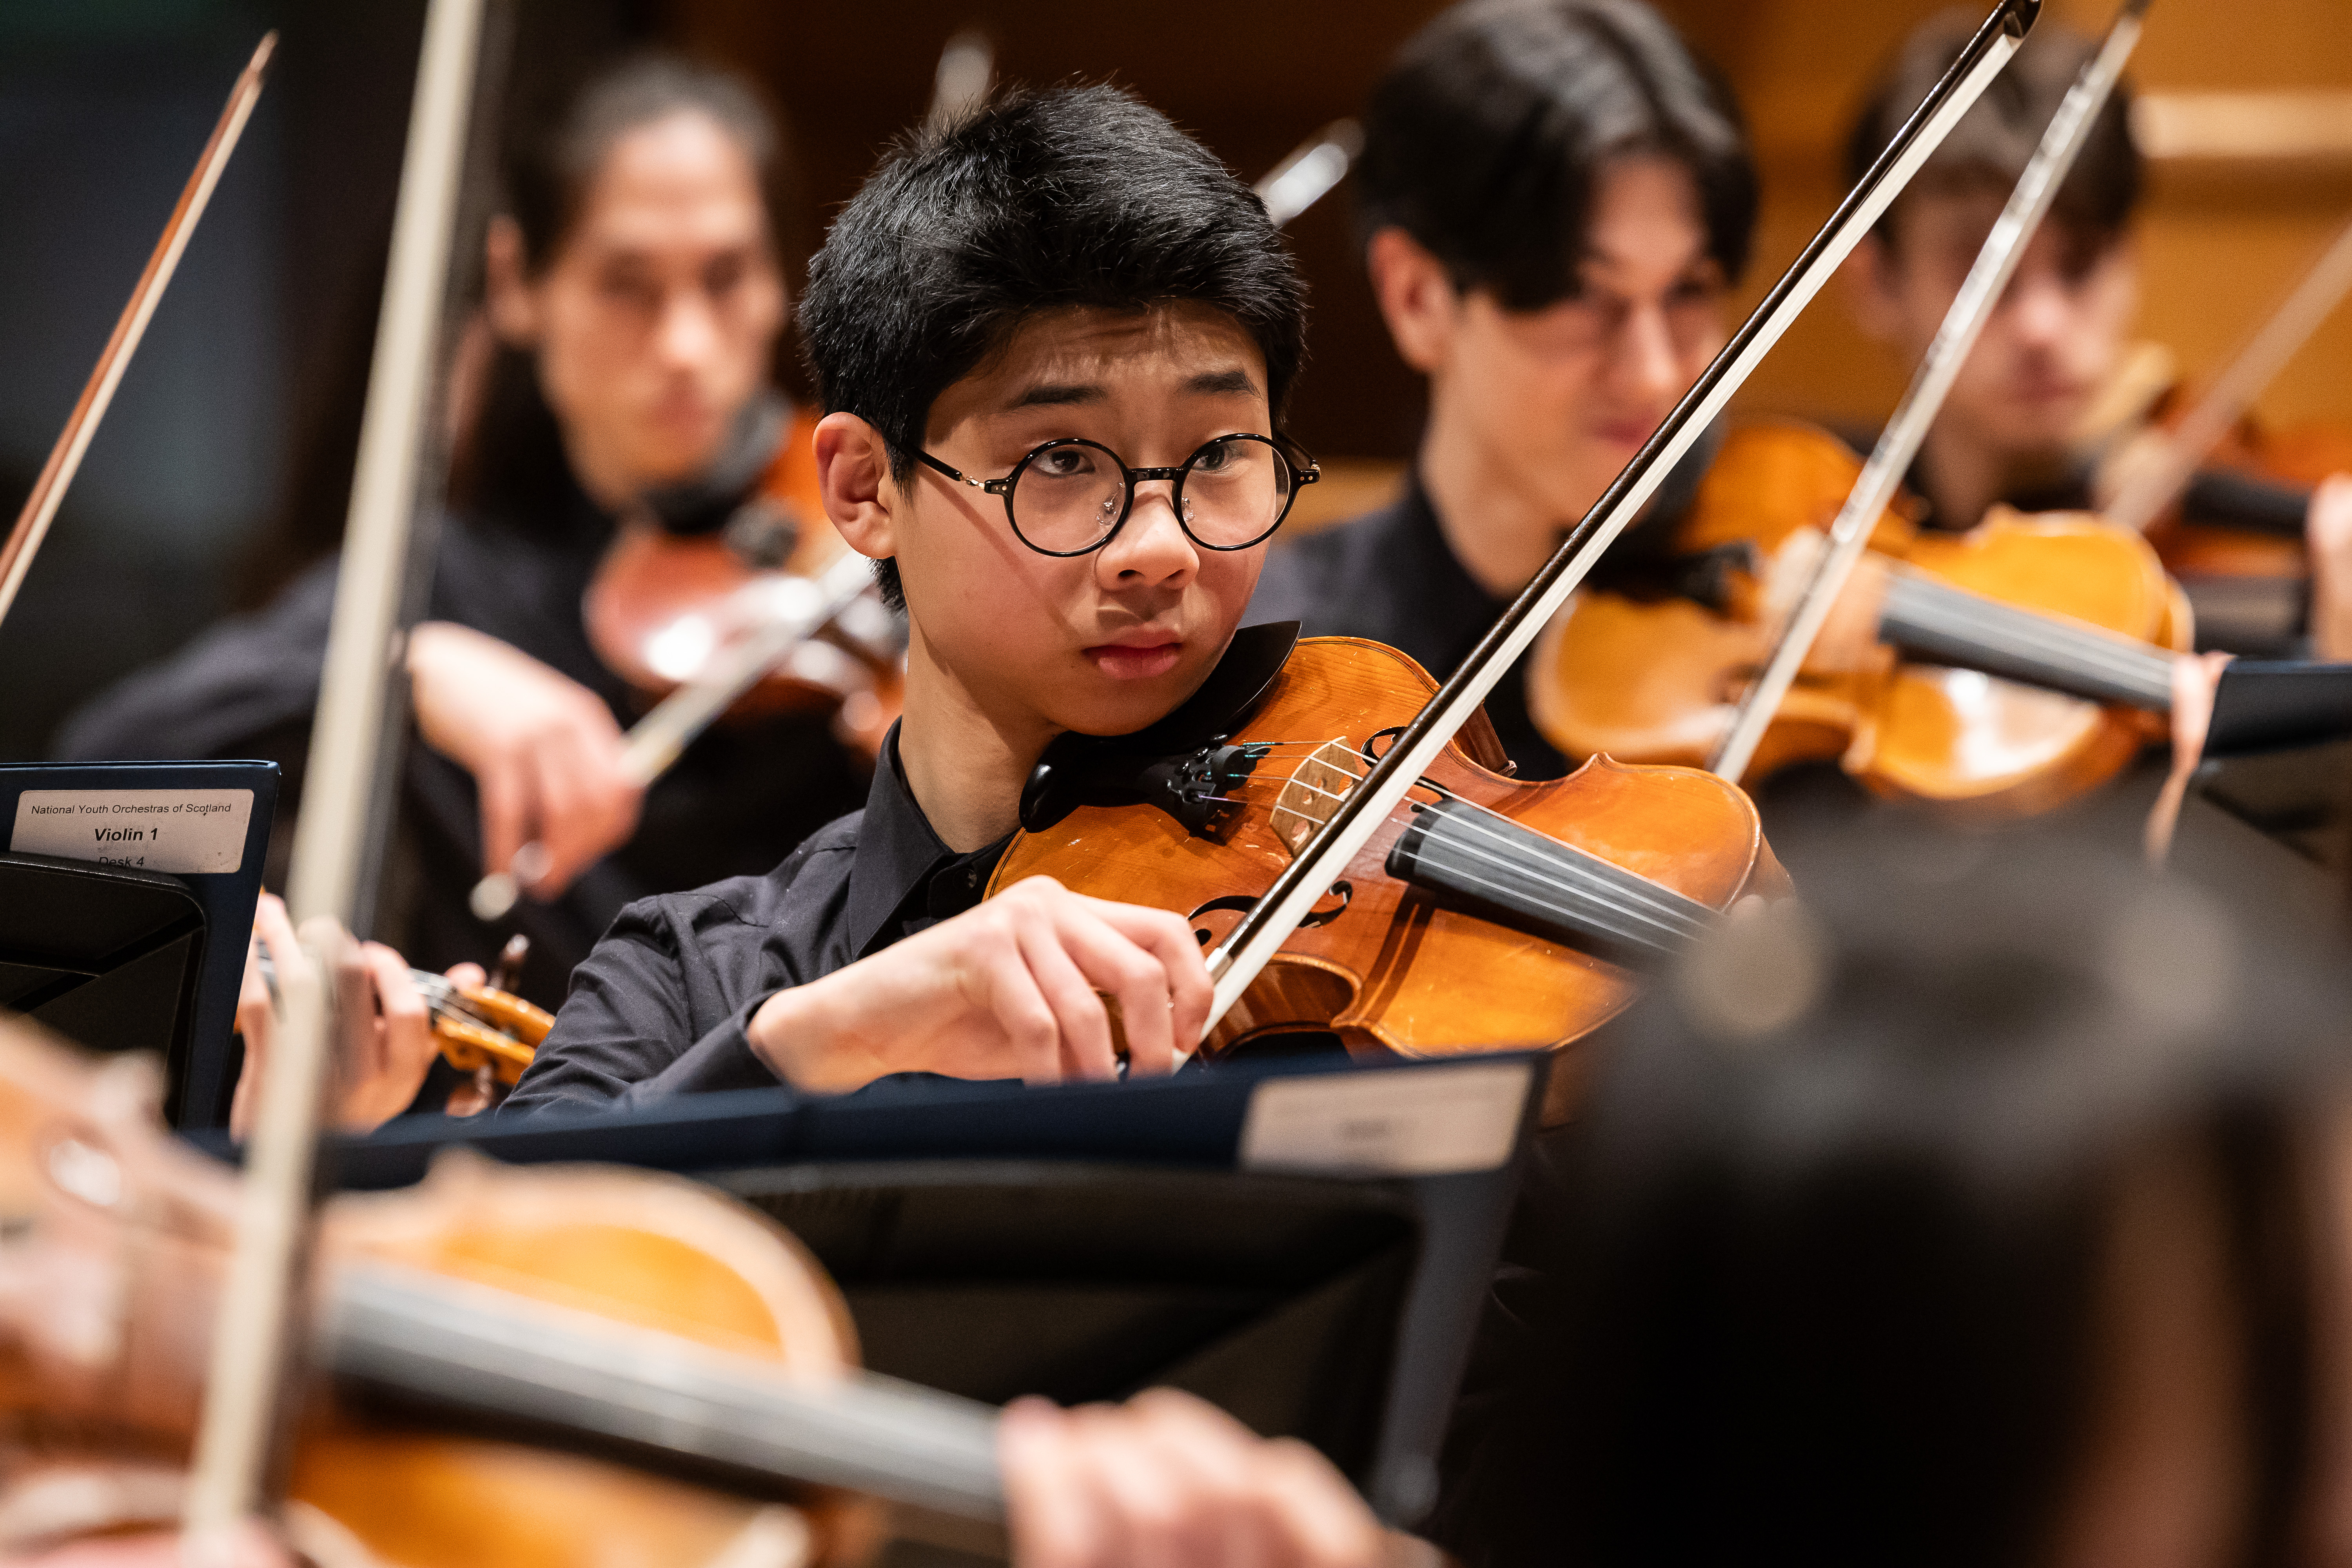 Violin player in the National Youth Orchestra of Scotland prepares to perform